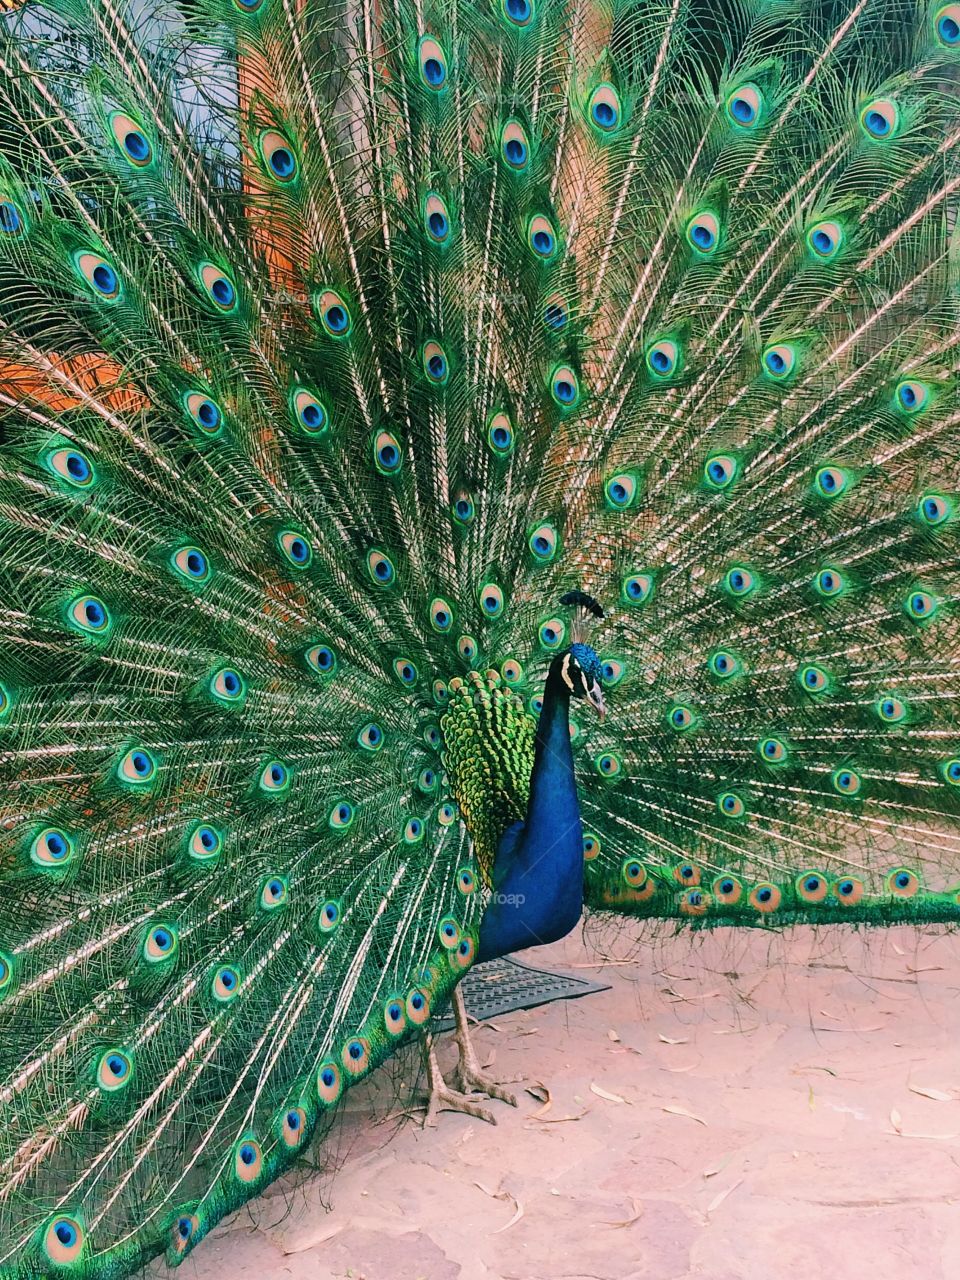 Peacock in town. 